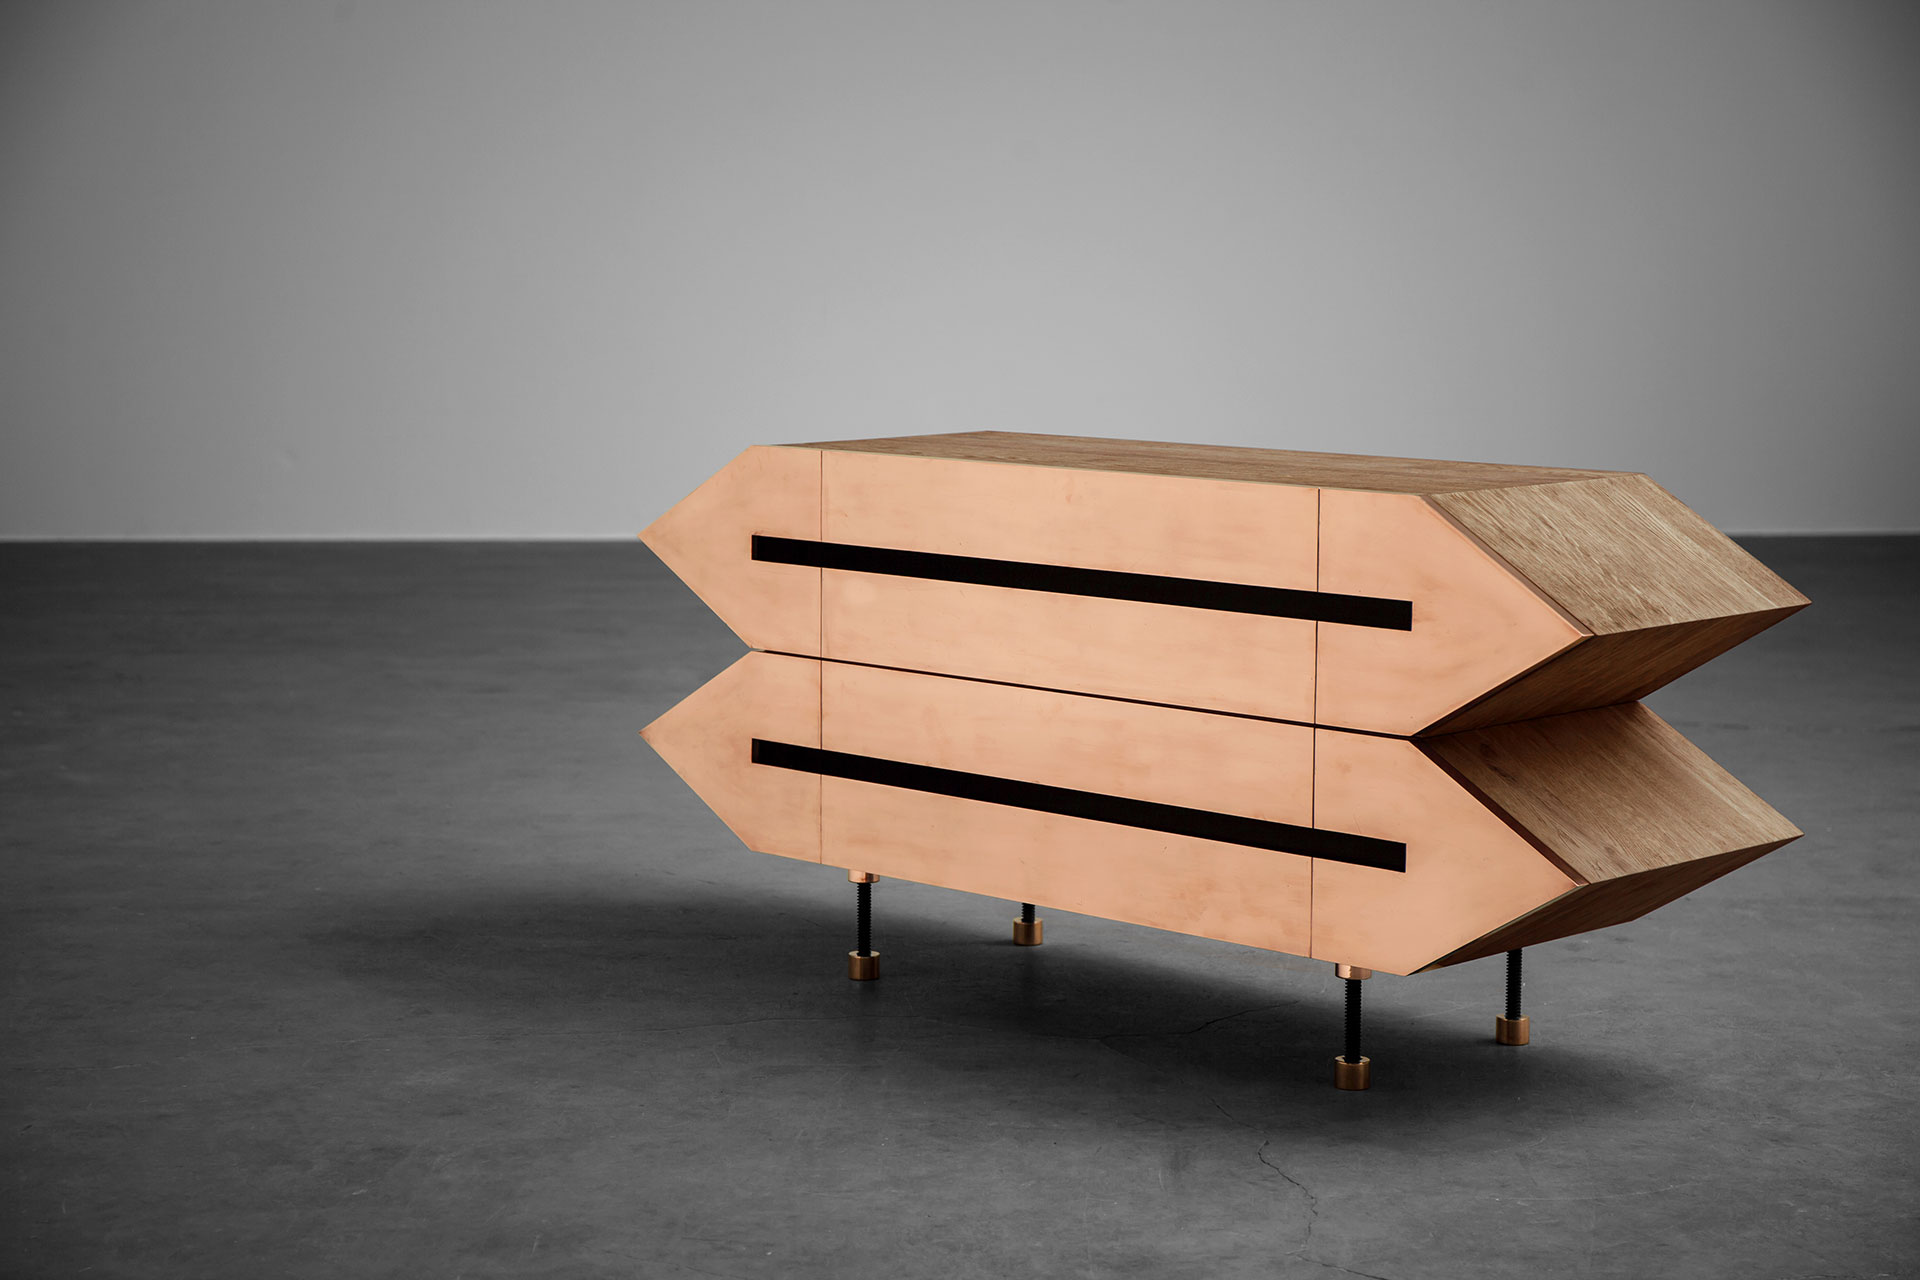 Conceptual design sideboard in brass and solid wood